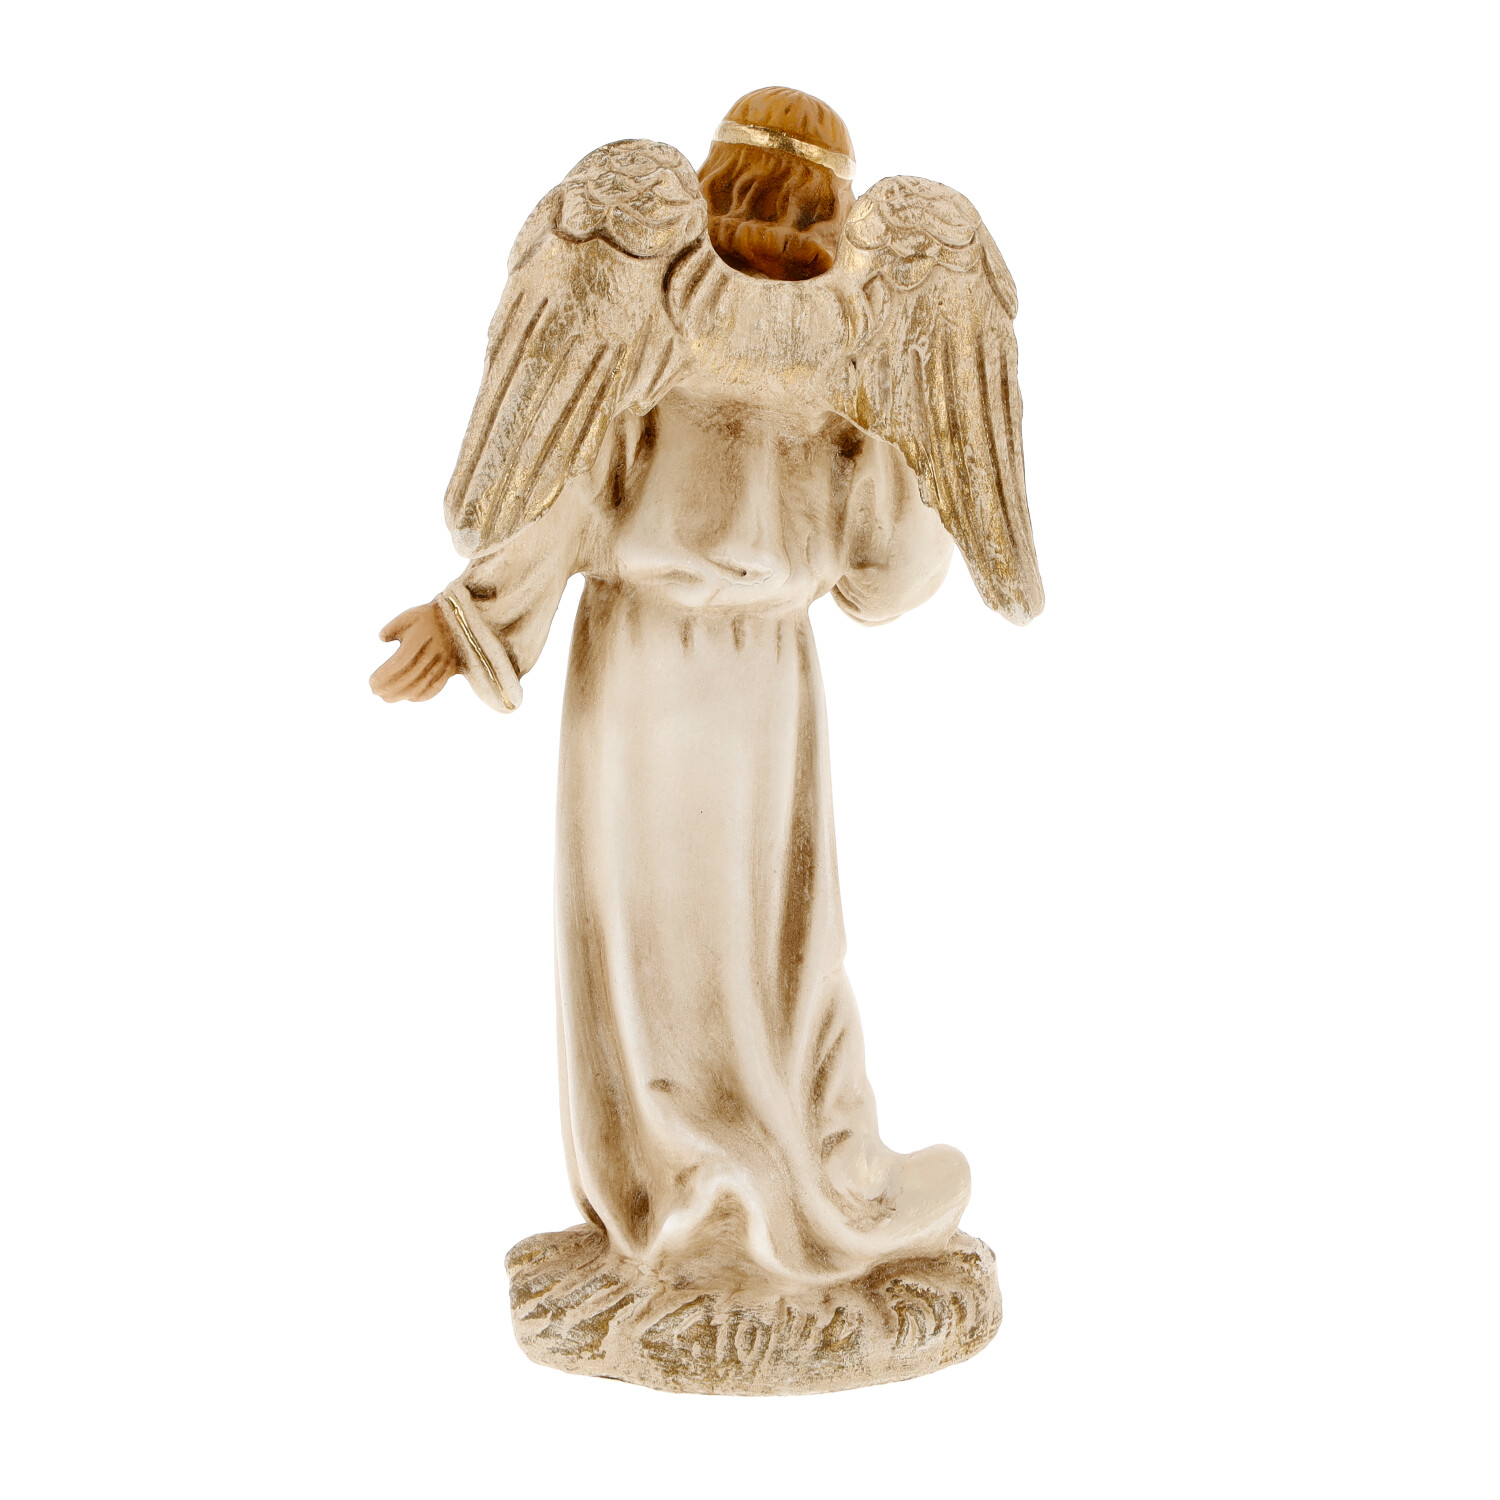 Adoring angel antique white Marolin Nativity figure - made in Germany 